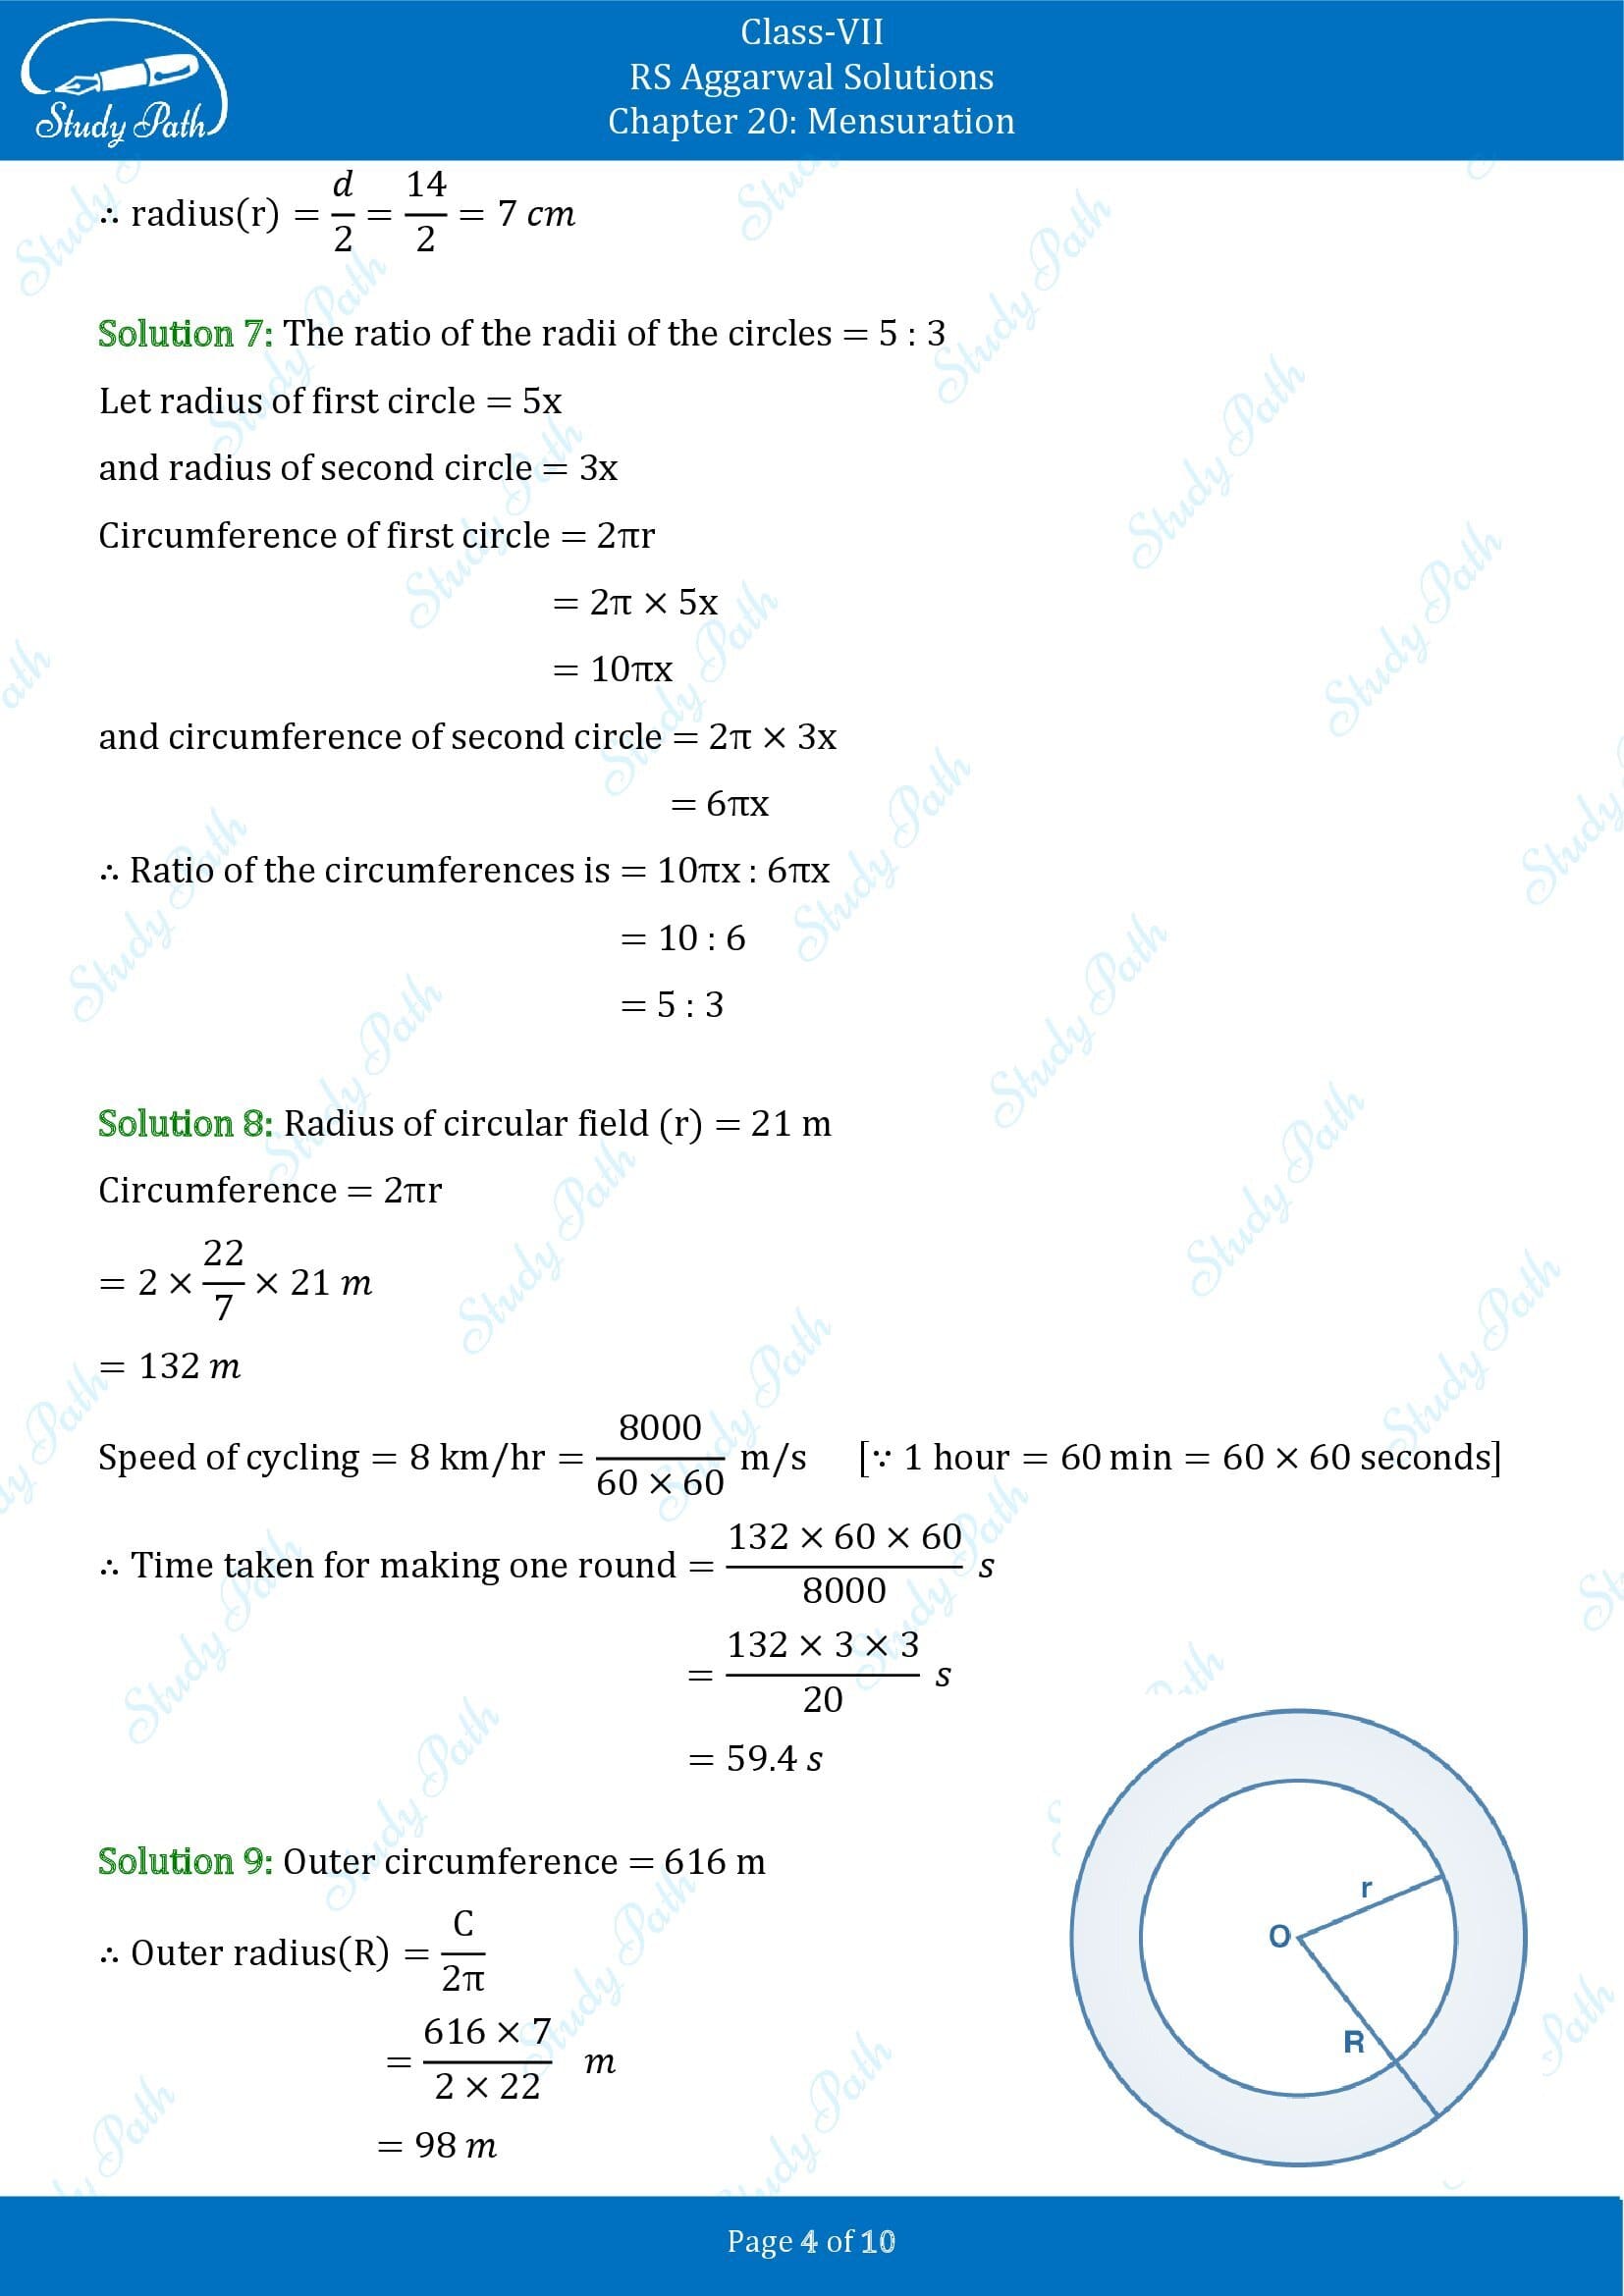 RS Aggarwal Solutions Class 7 Chapter 20 Mensuration Exercise 20E 00004